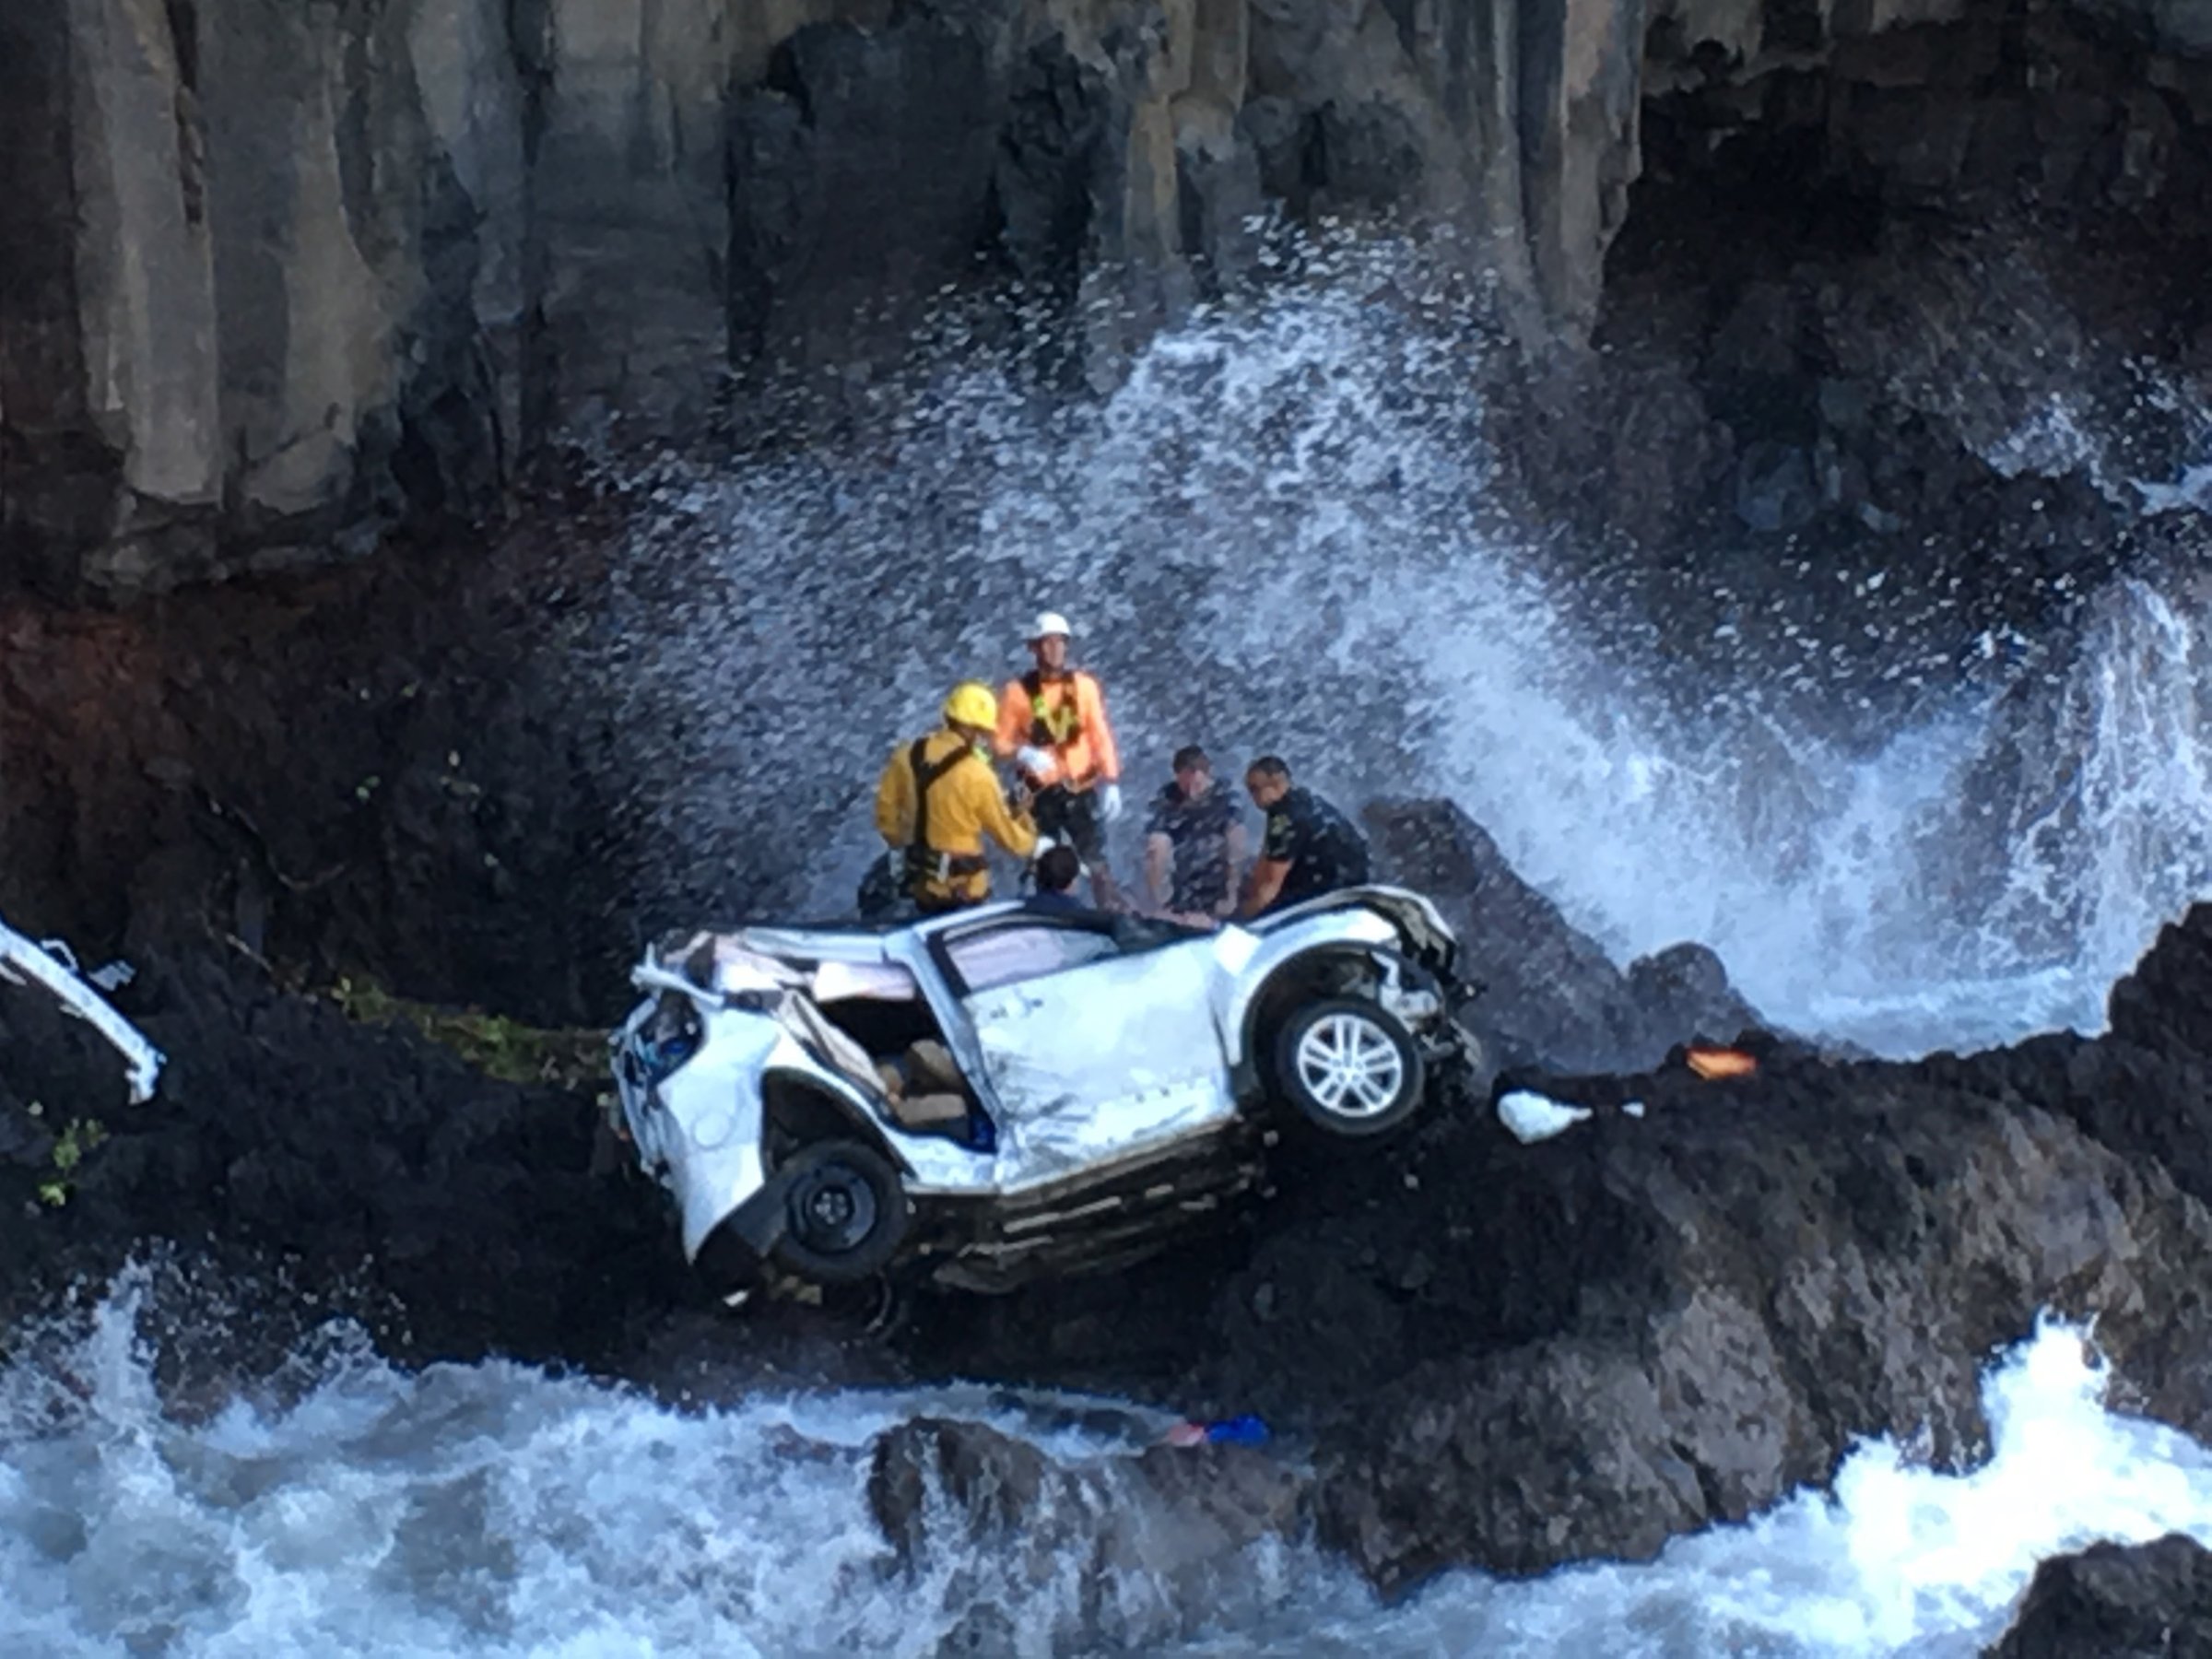 Rescue workers respond to the scene of a car crash off Maui’s Hana Highway in Hana, Hawaii on May 29, 2016.